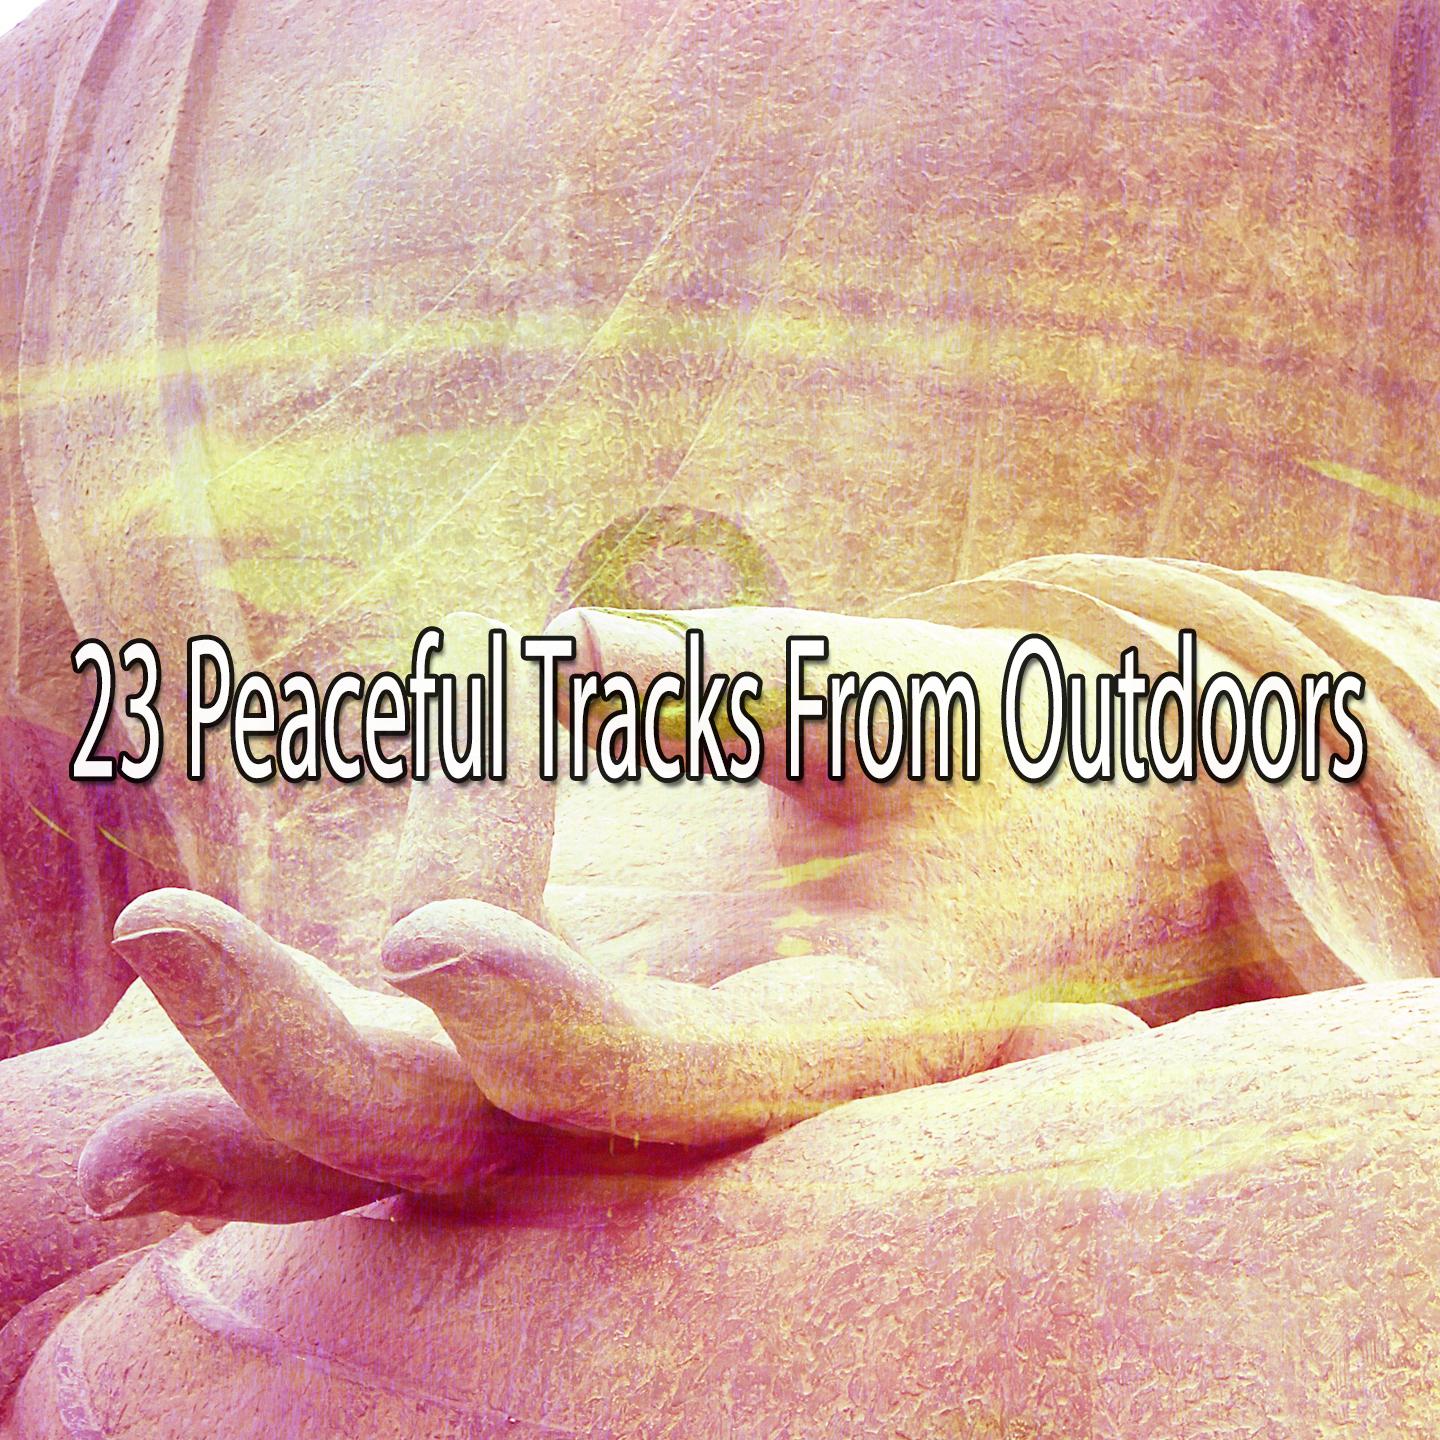 23 Peaceful Tracks From Outdoors